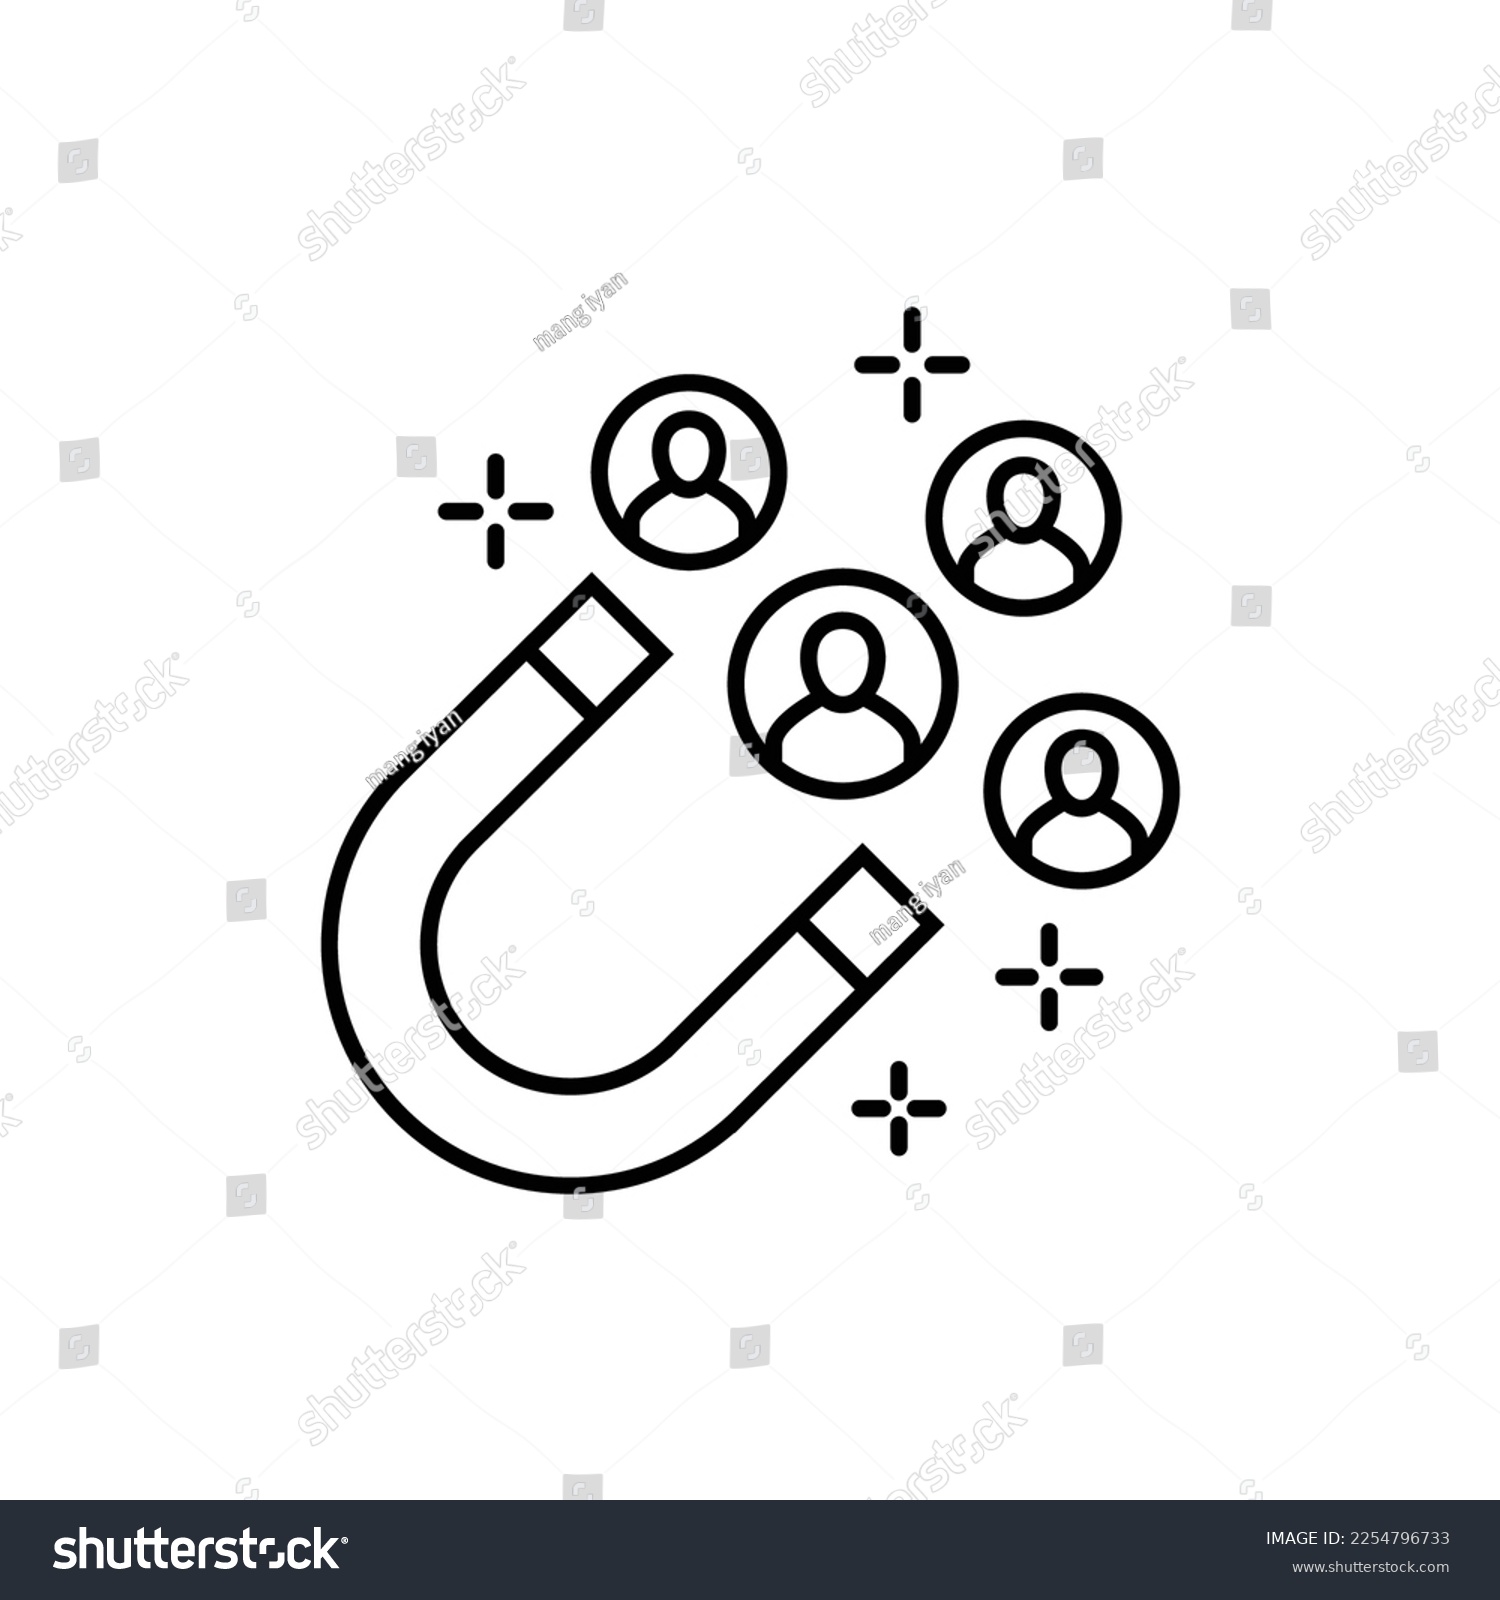 SVG of customer retention line icon with a magnet svg